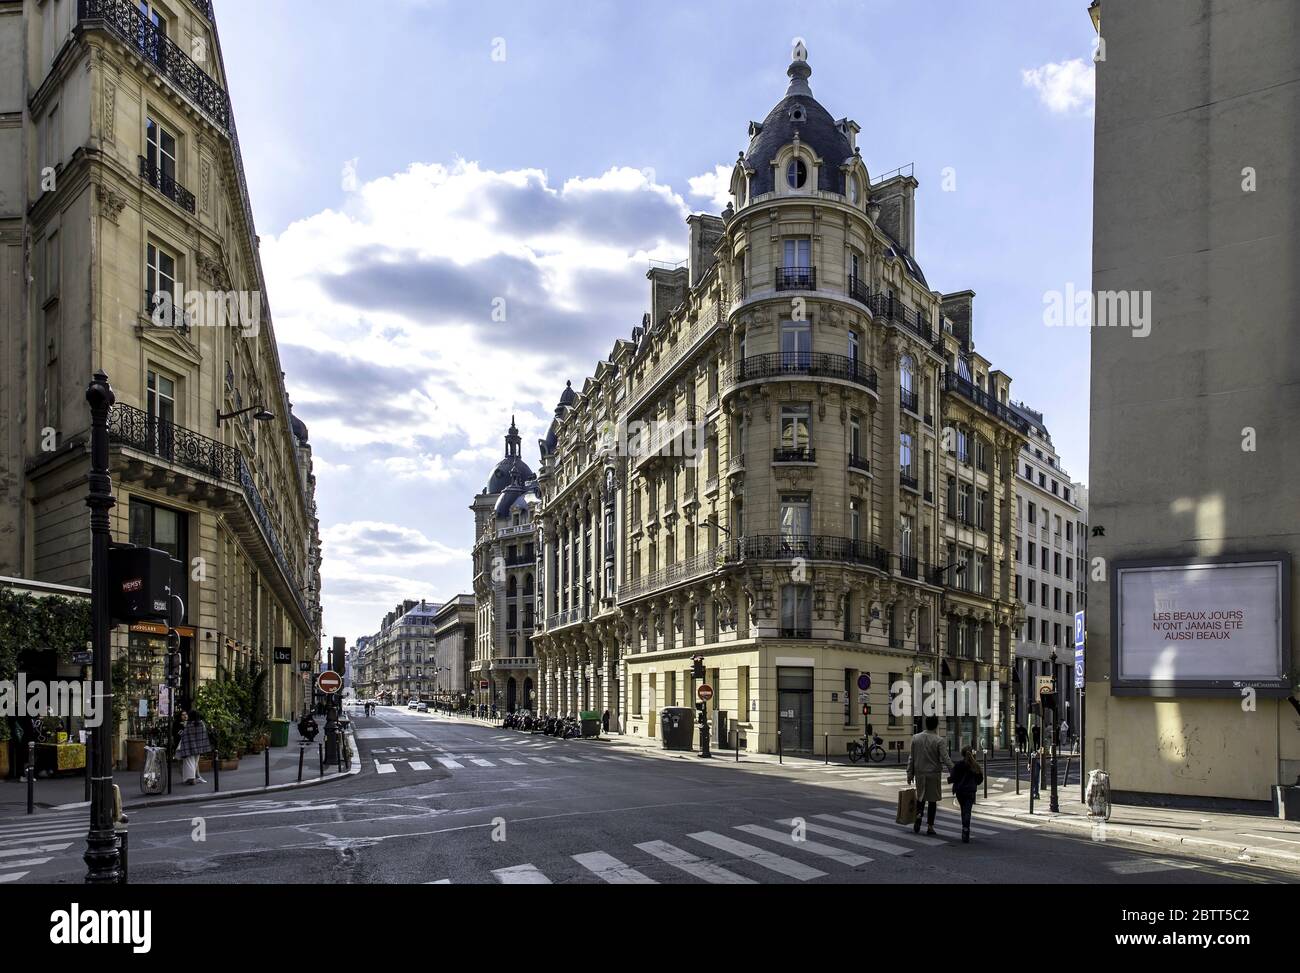 Paris, France - May 14, 2020: Typical haussmann buildings in Paris on the right Bank of the River Seine (Reaumur street) during containment measures d Stock Photo